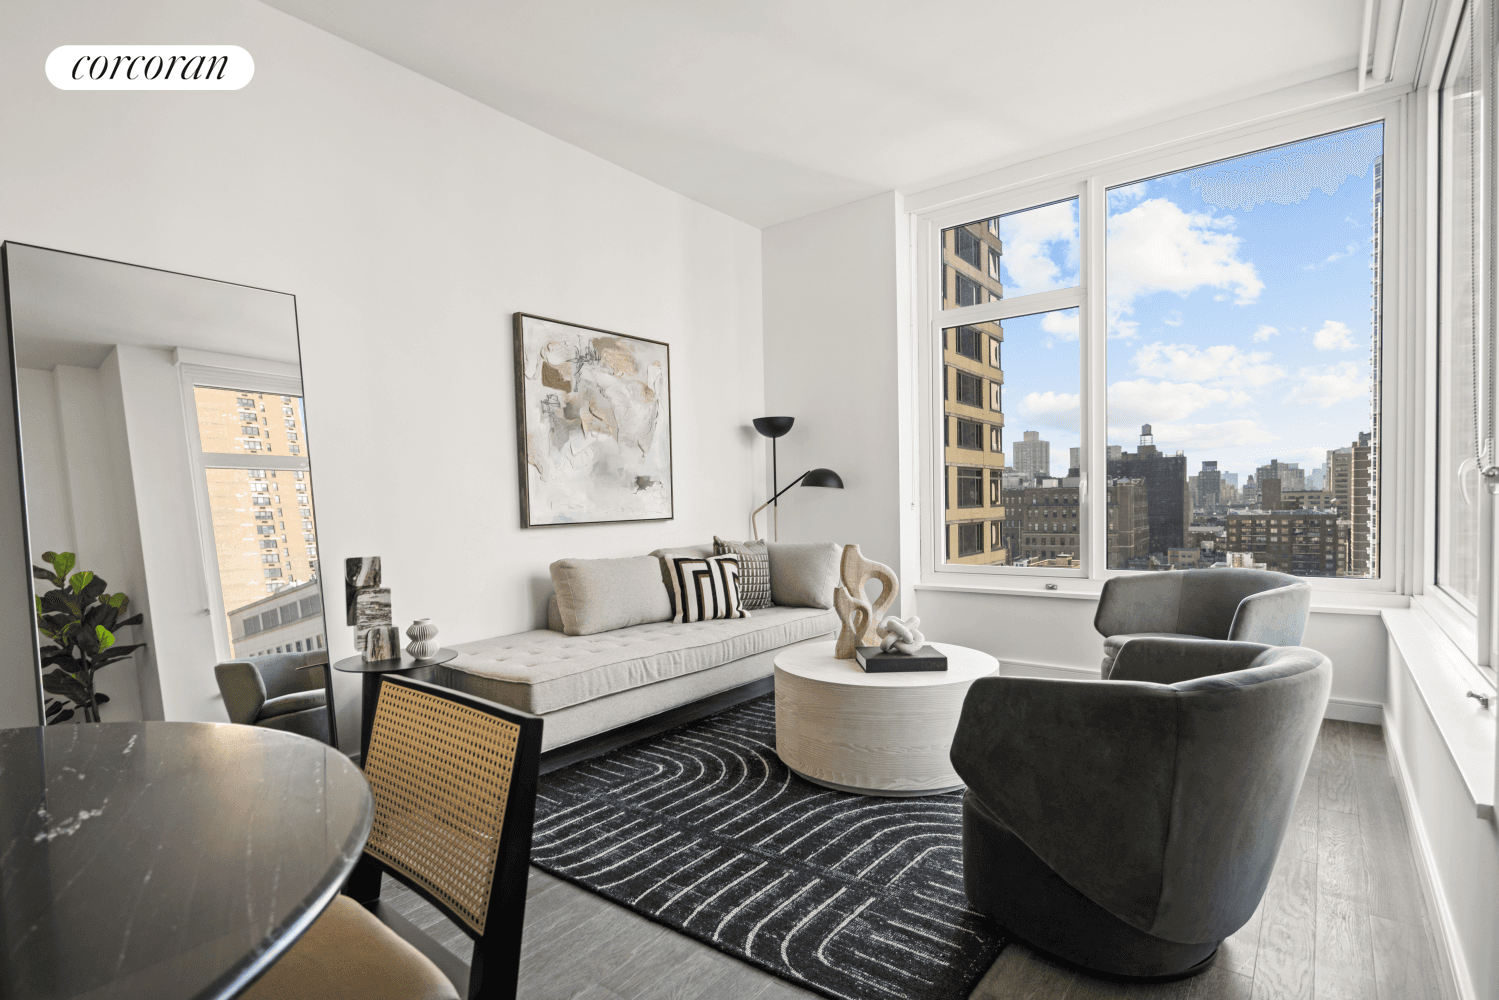 Welcome to Residence E, a corner unit two bedroom, one bathroom with a private terrace facing east, south, and west featuring remarkable city and Empire State views.